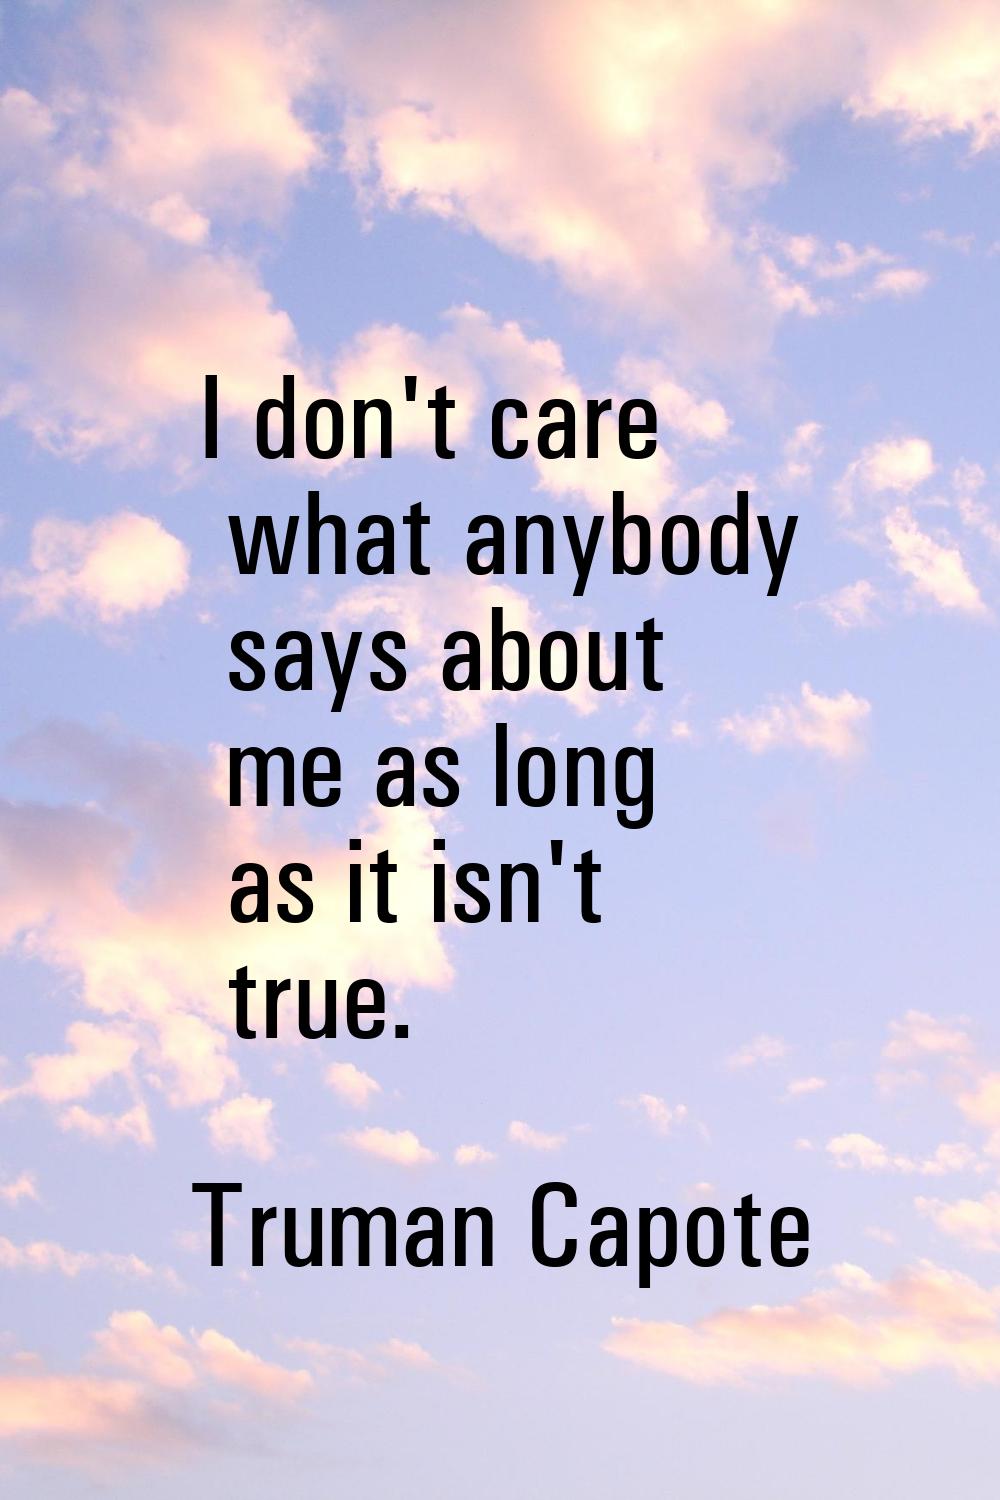 I don't care what anybody says about me as long as it isn't true.